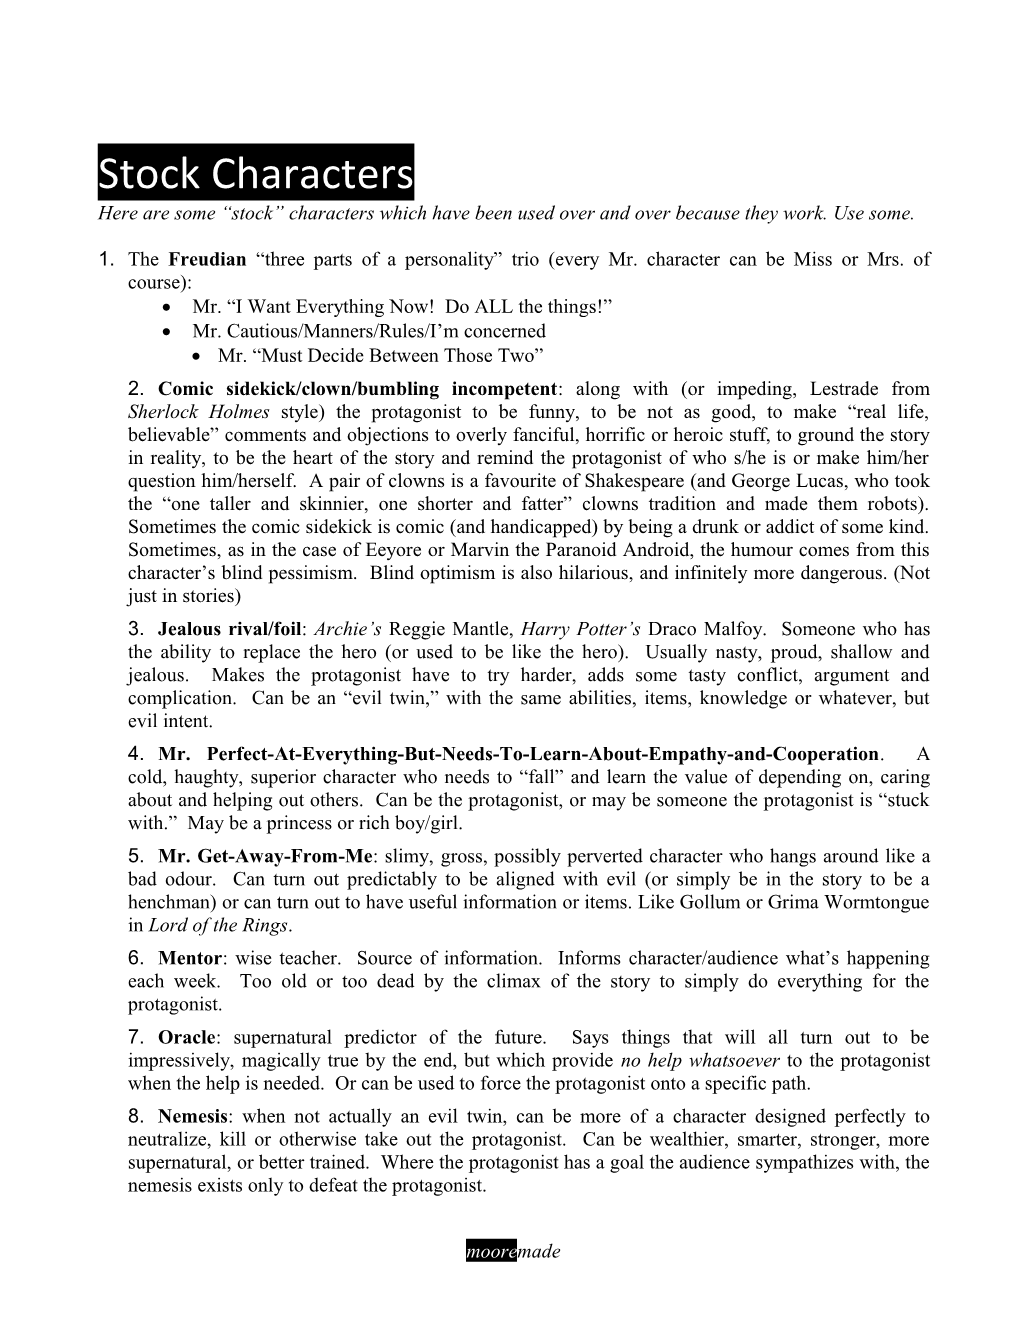 Here Are Some Stock Characters Which Have Been Used Over and Over Because They Work. Use Some